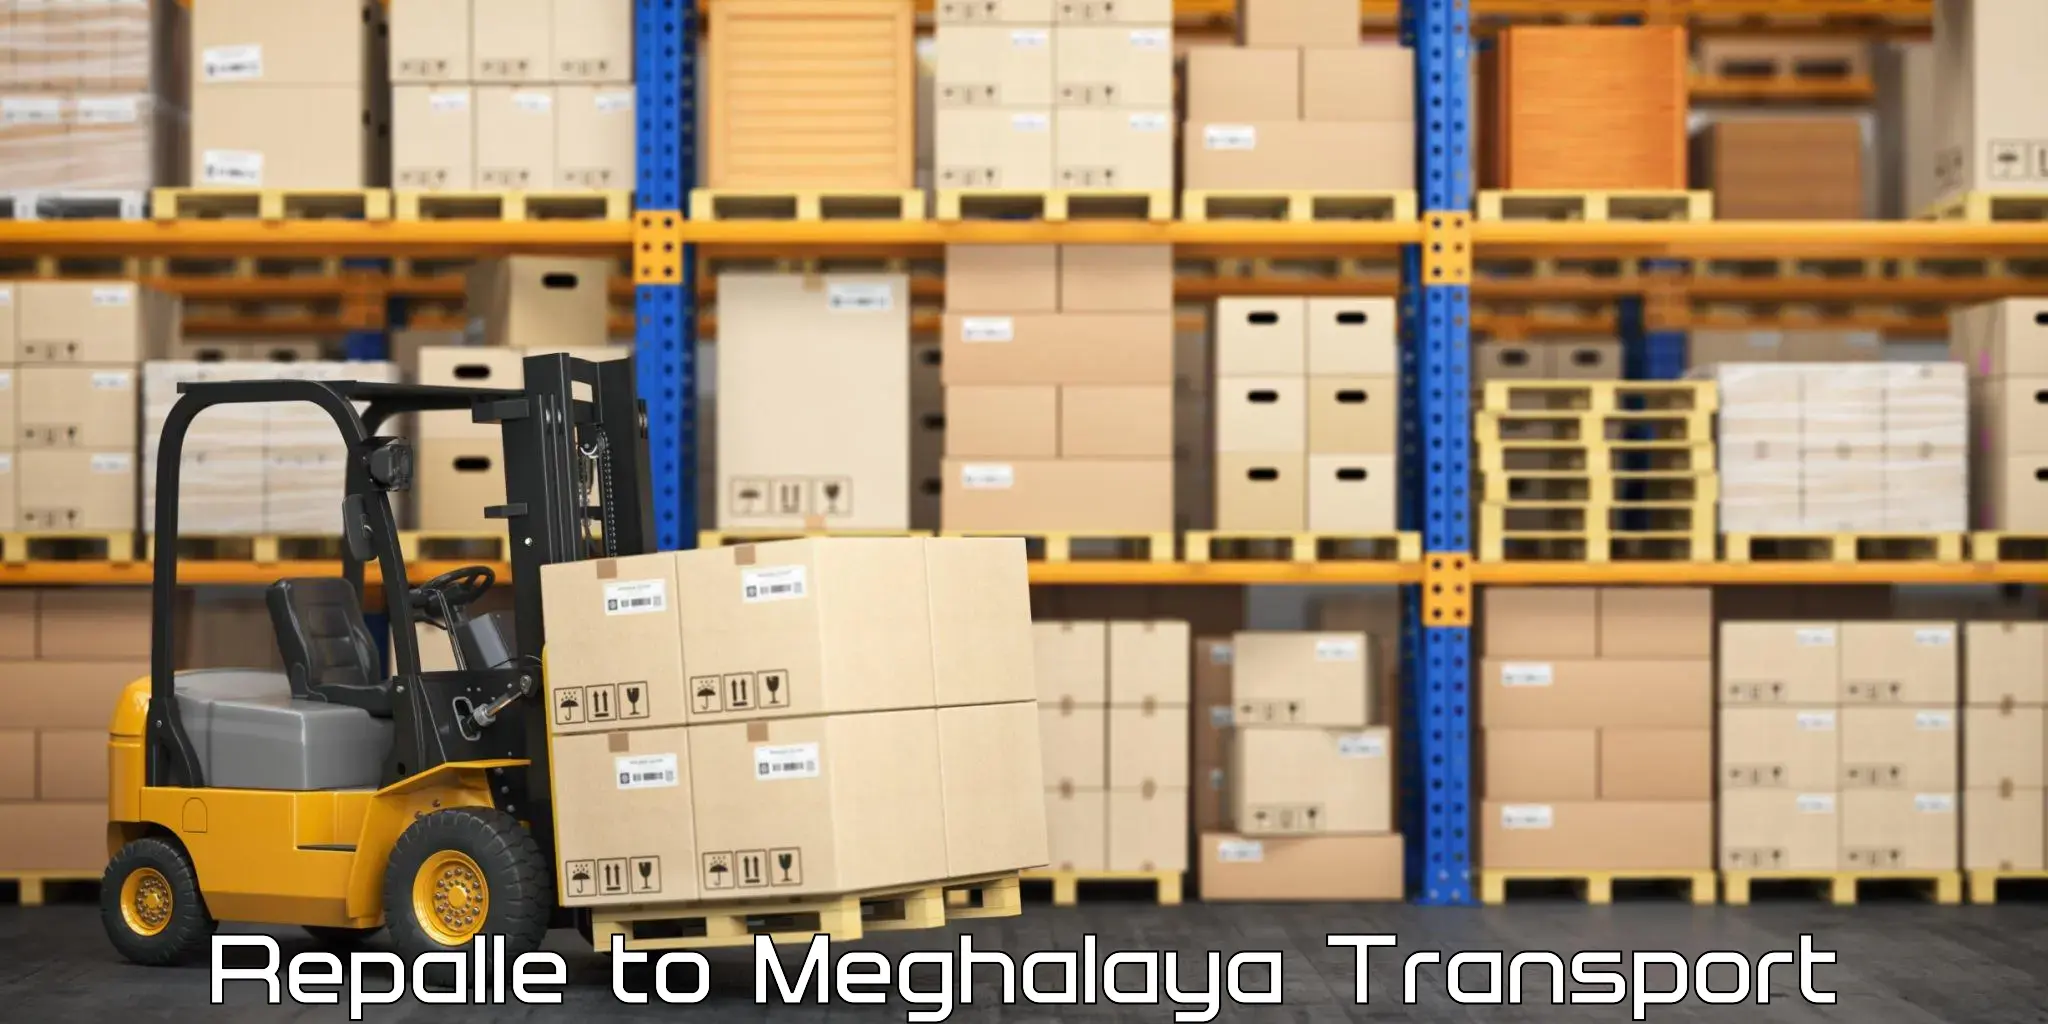 Truck transport companies in India Repalle to Meghalaya